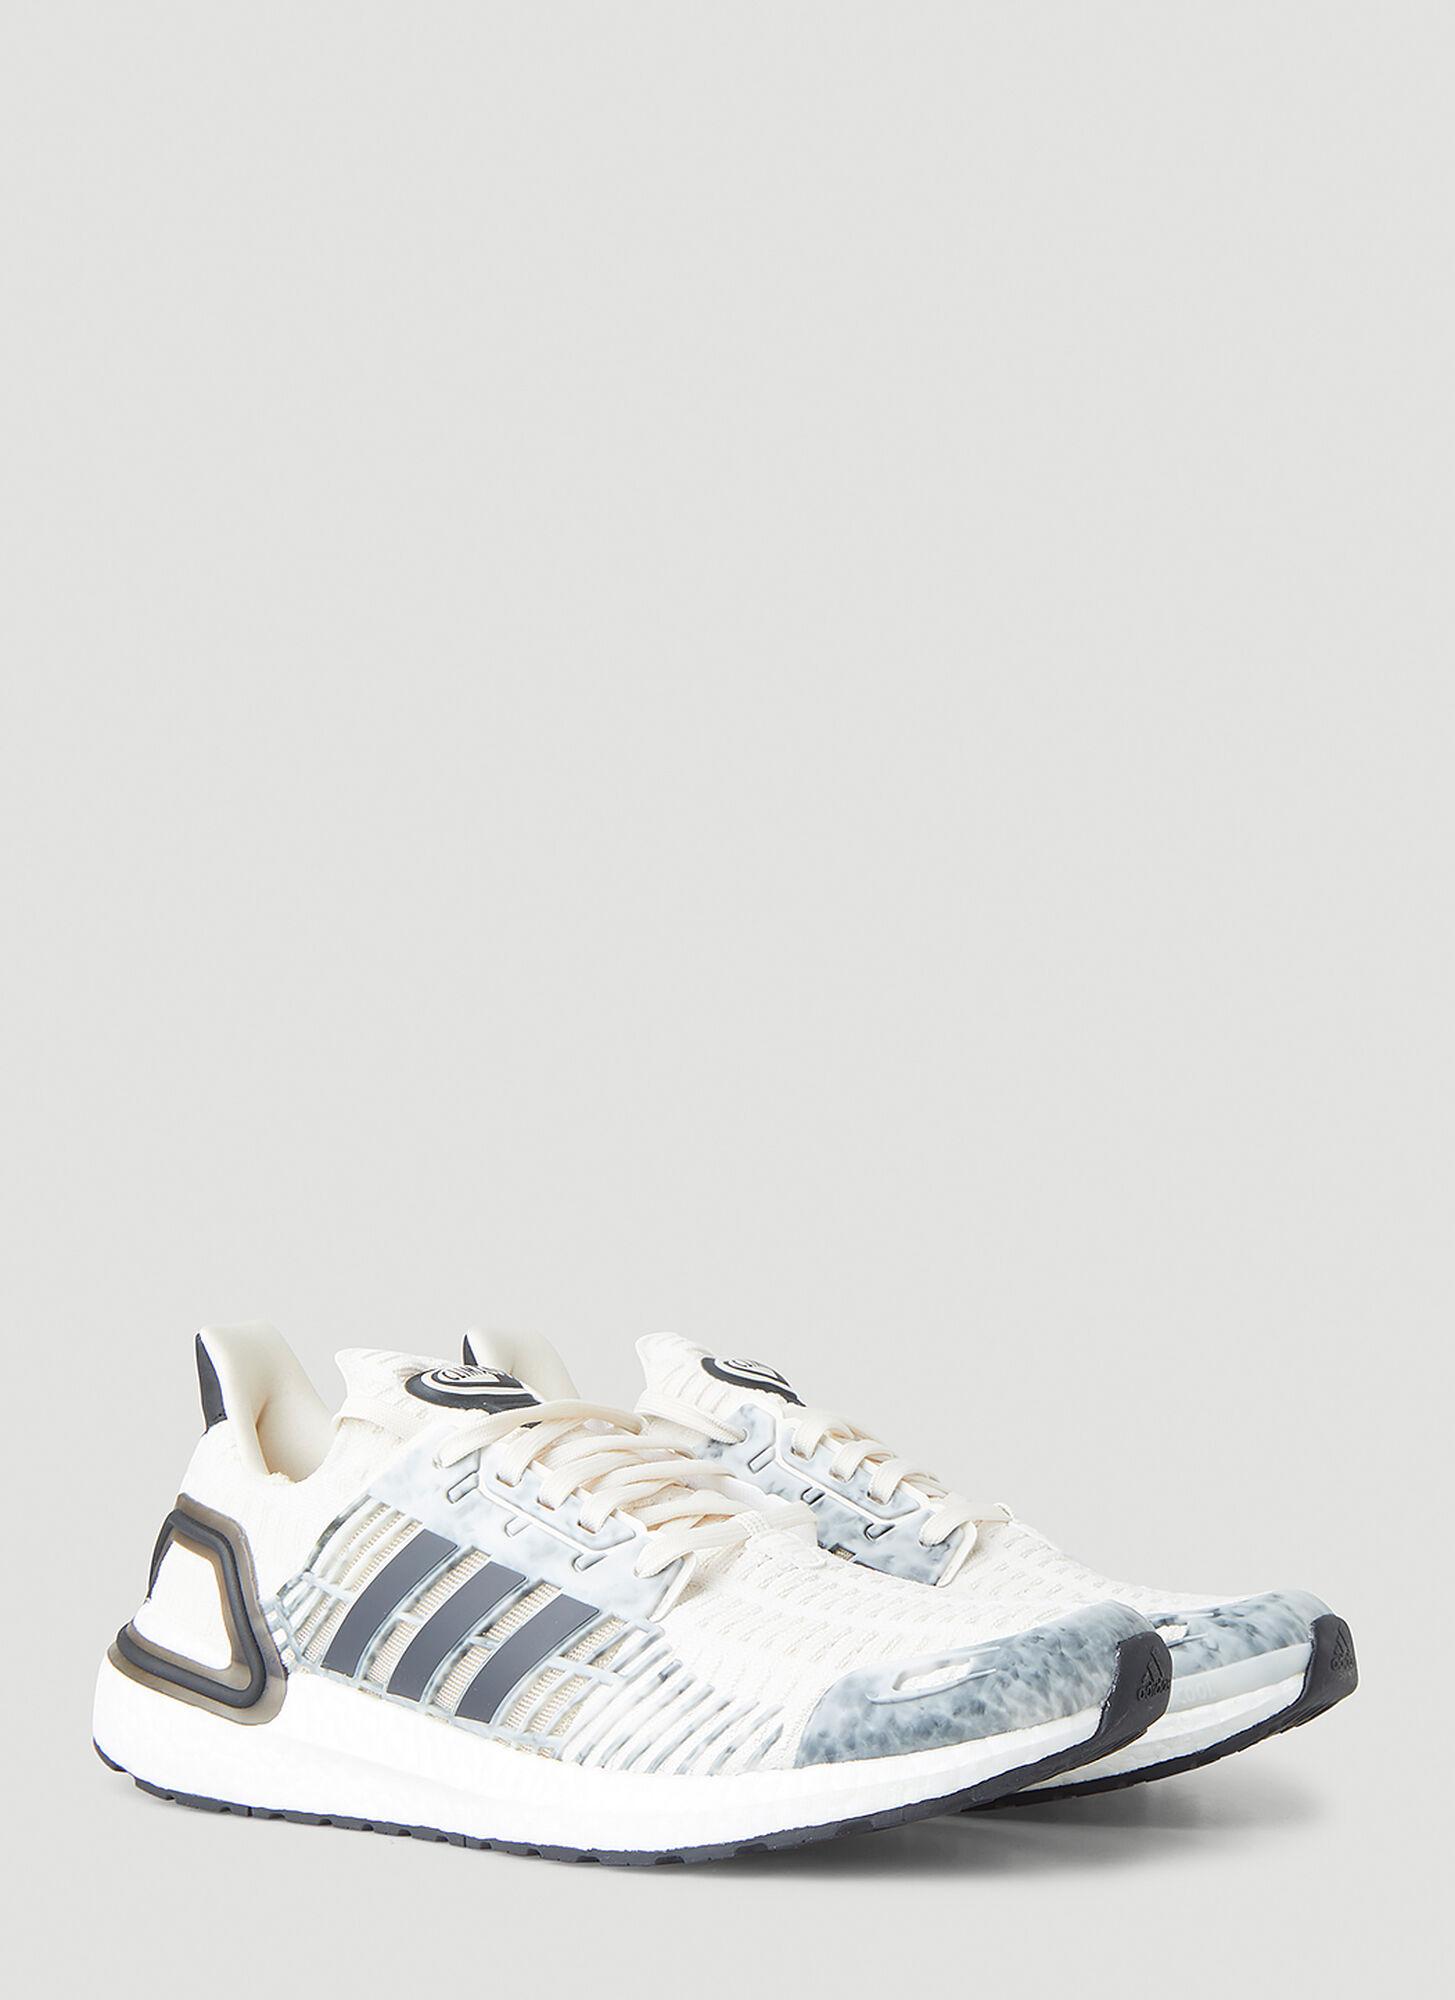 adidas Ultraboost Cc 1 Dna Sneakers in White for Men | Lyst